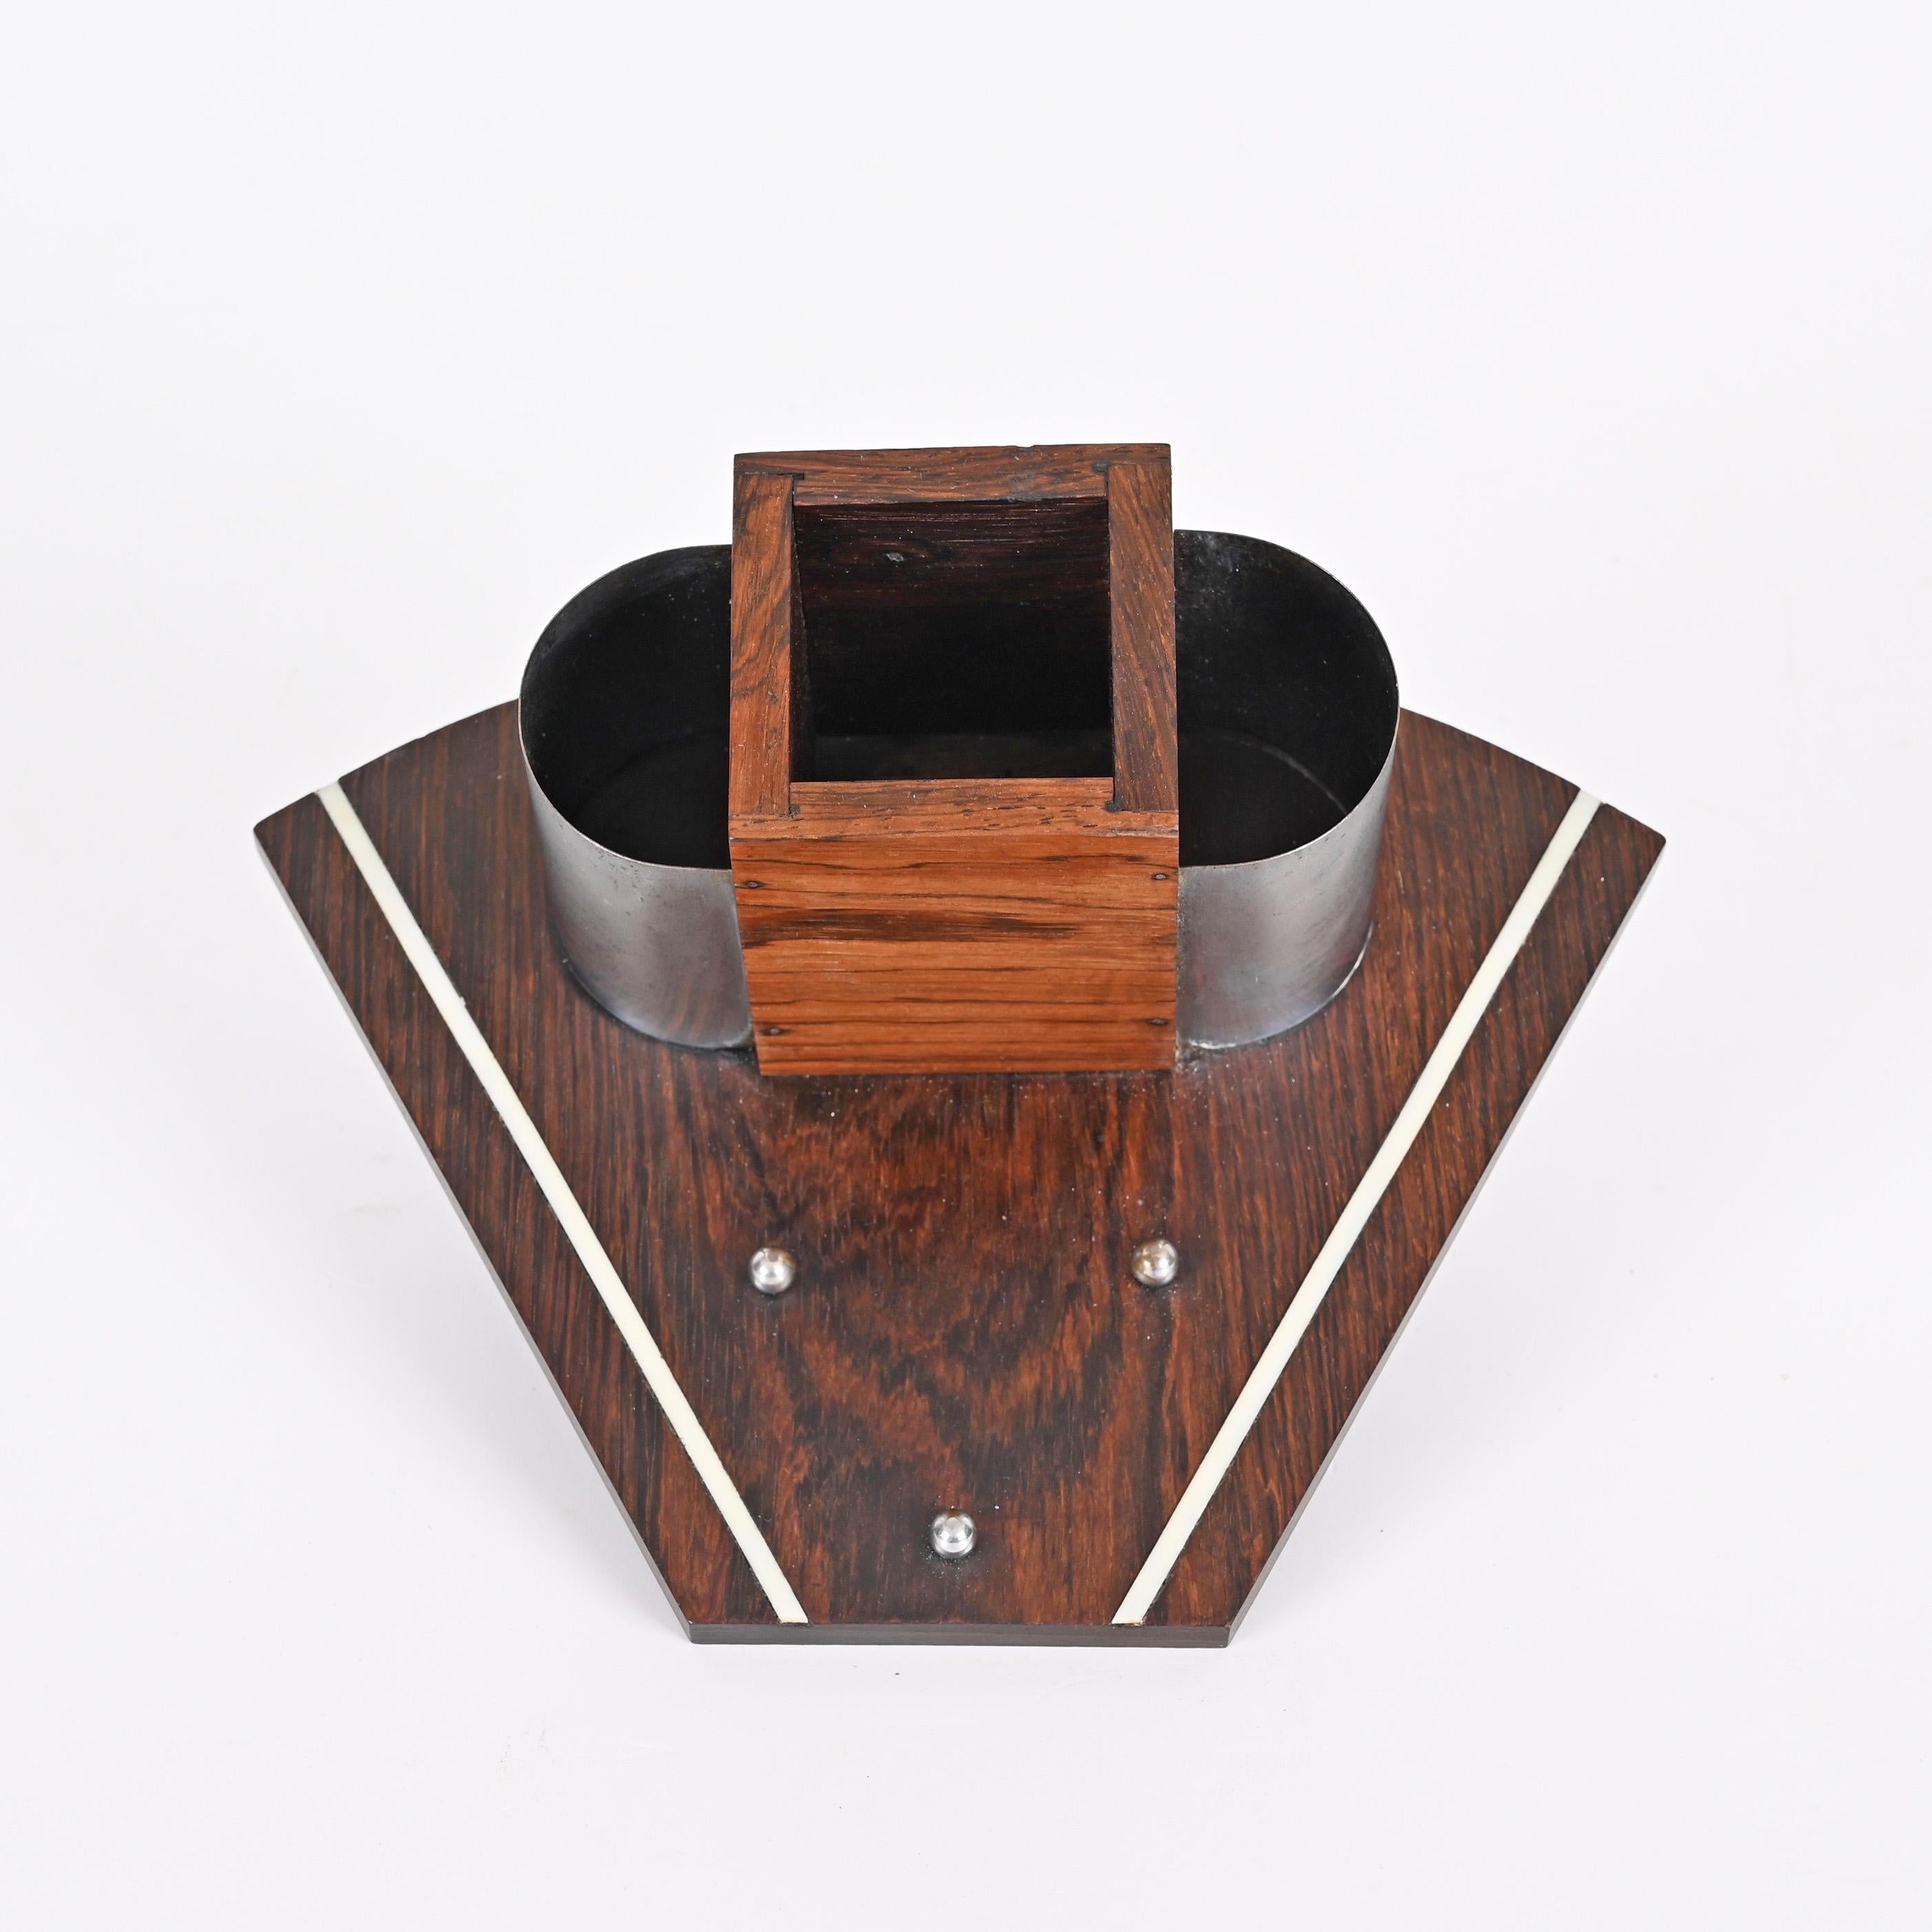 Italian Art Deco Pen Holder in Macassar Wood, Italy Desk Accessory from the 1930s For Sale